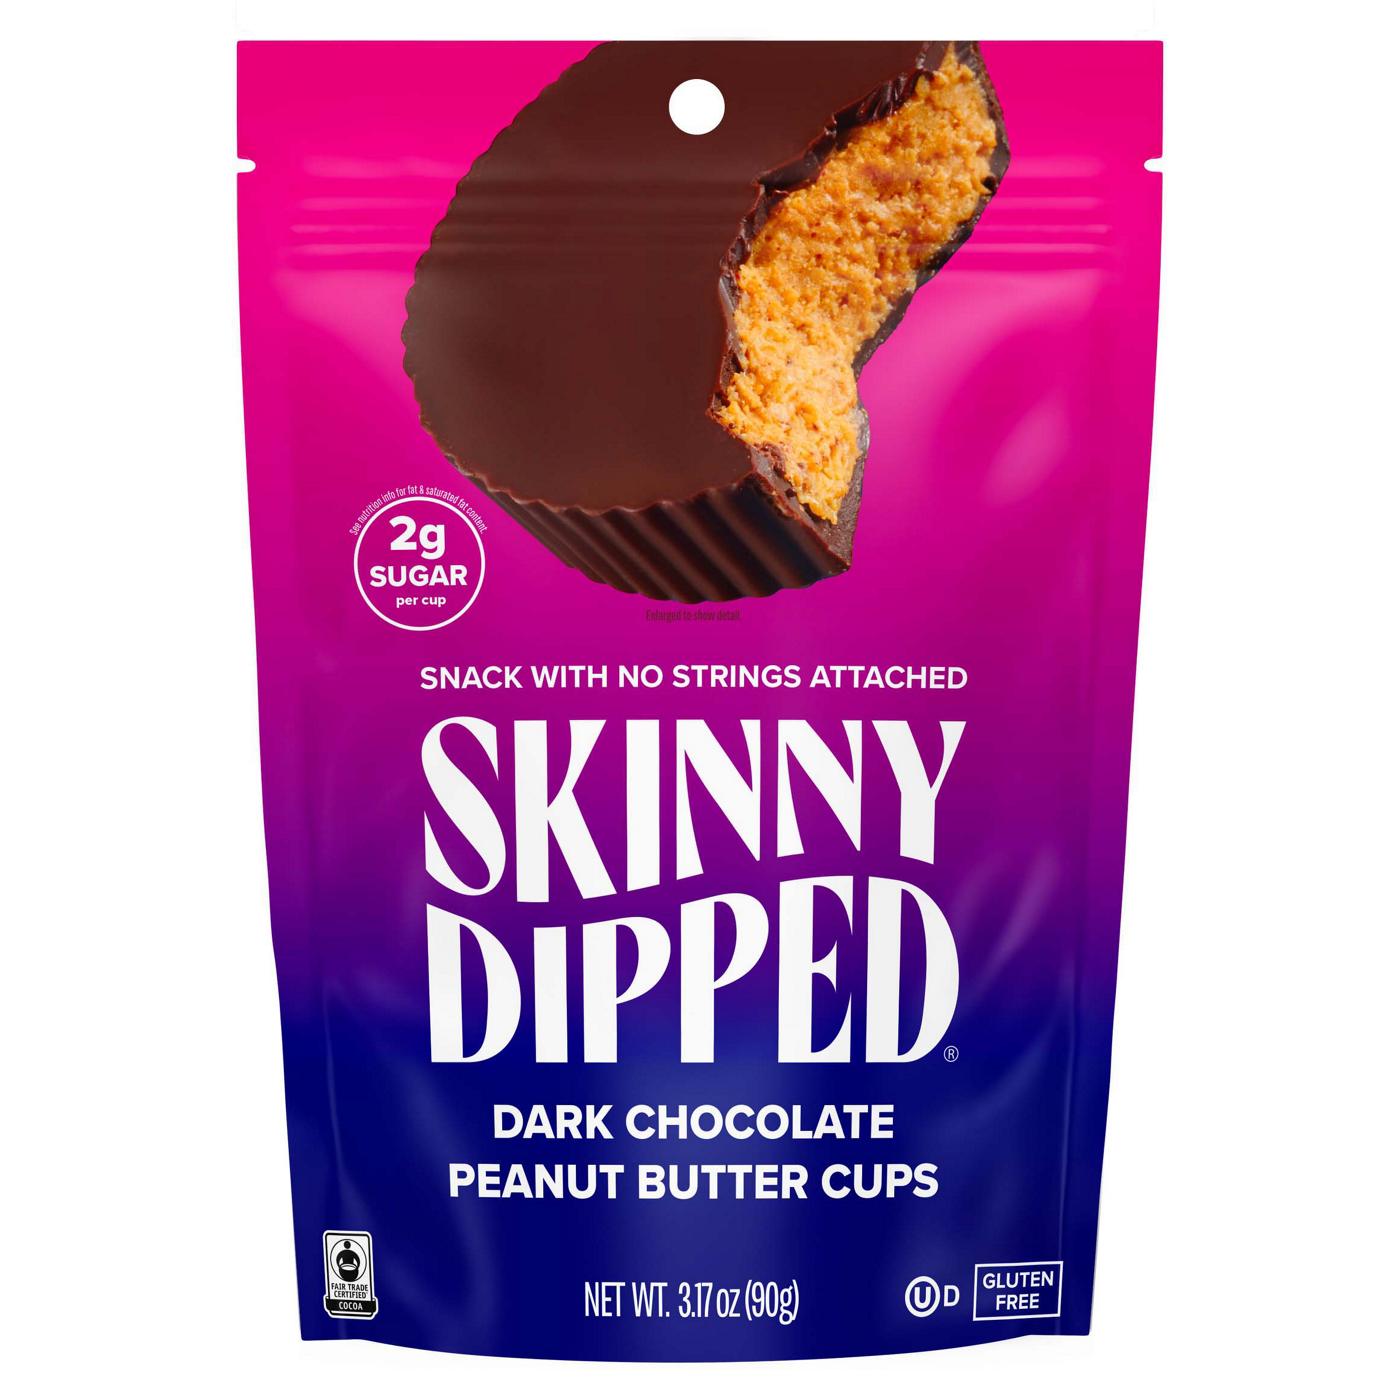 SkinnyDipped Dark Chocolate Peanut Butter Cups; image 1 of 2